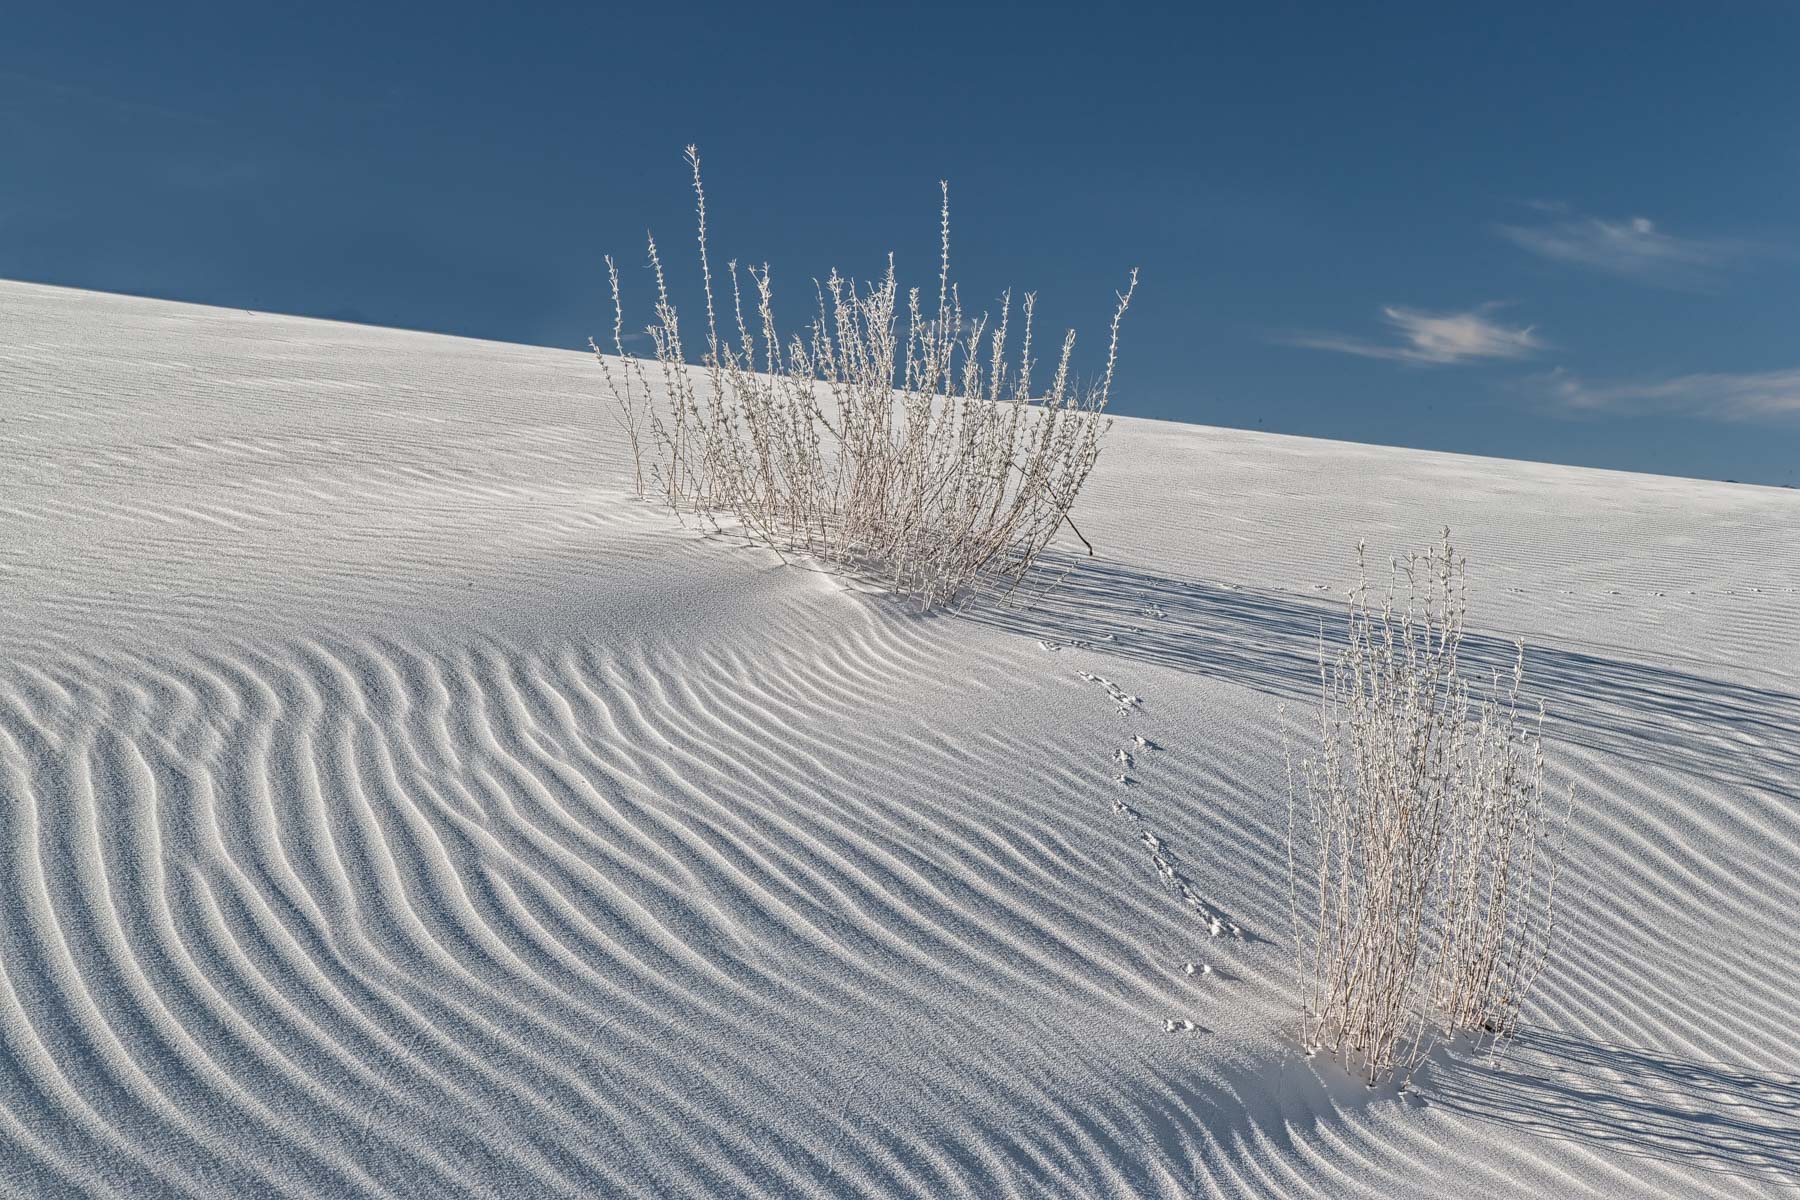 Gypsum Caked Grass and Animal Tracks in White Sands NP